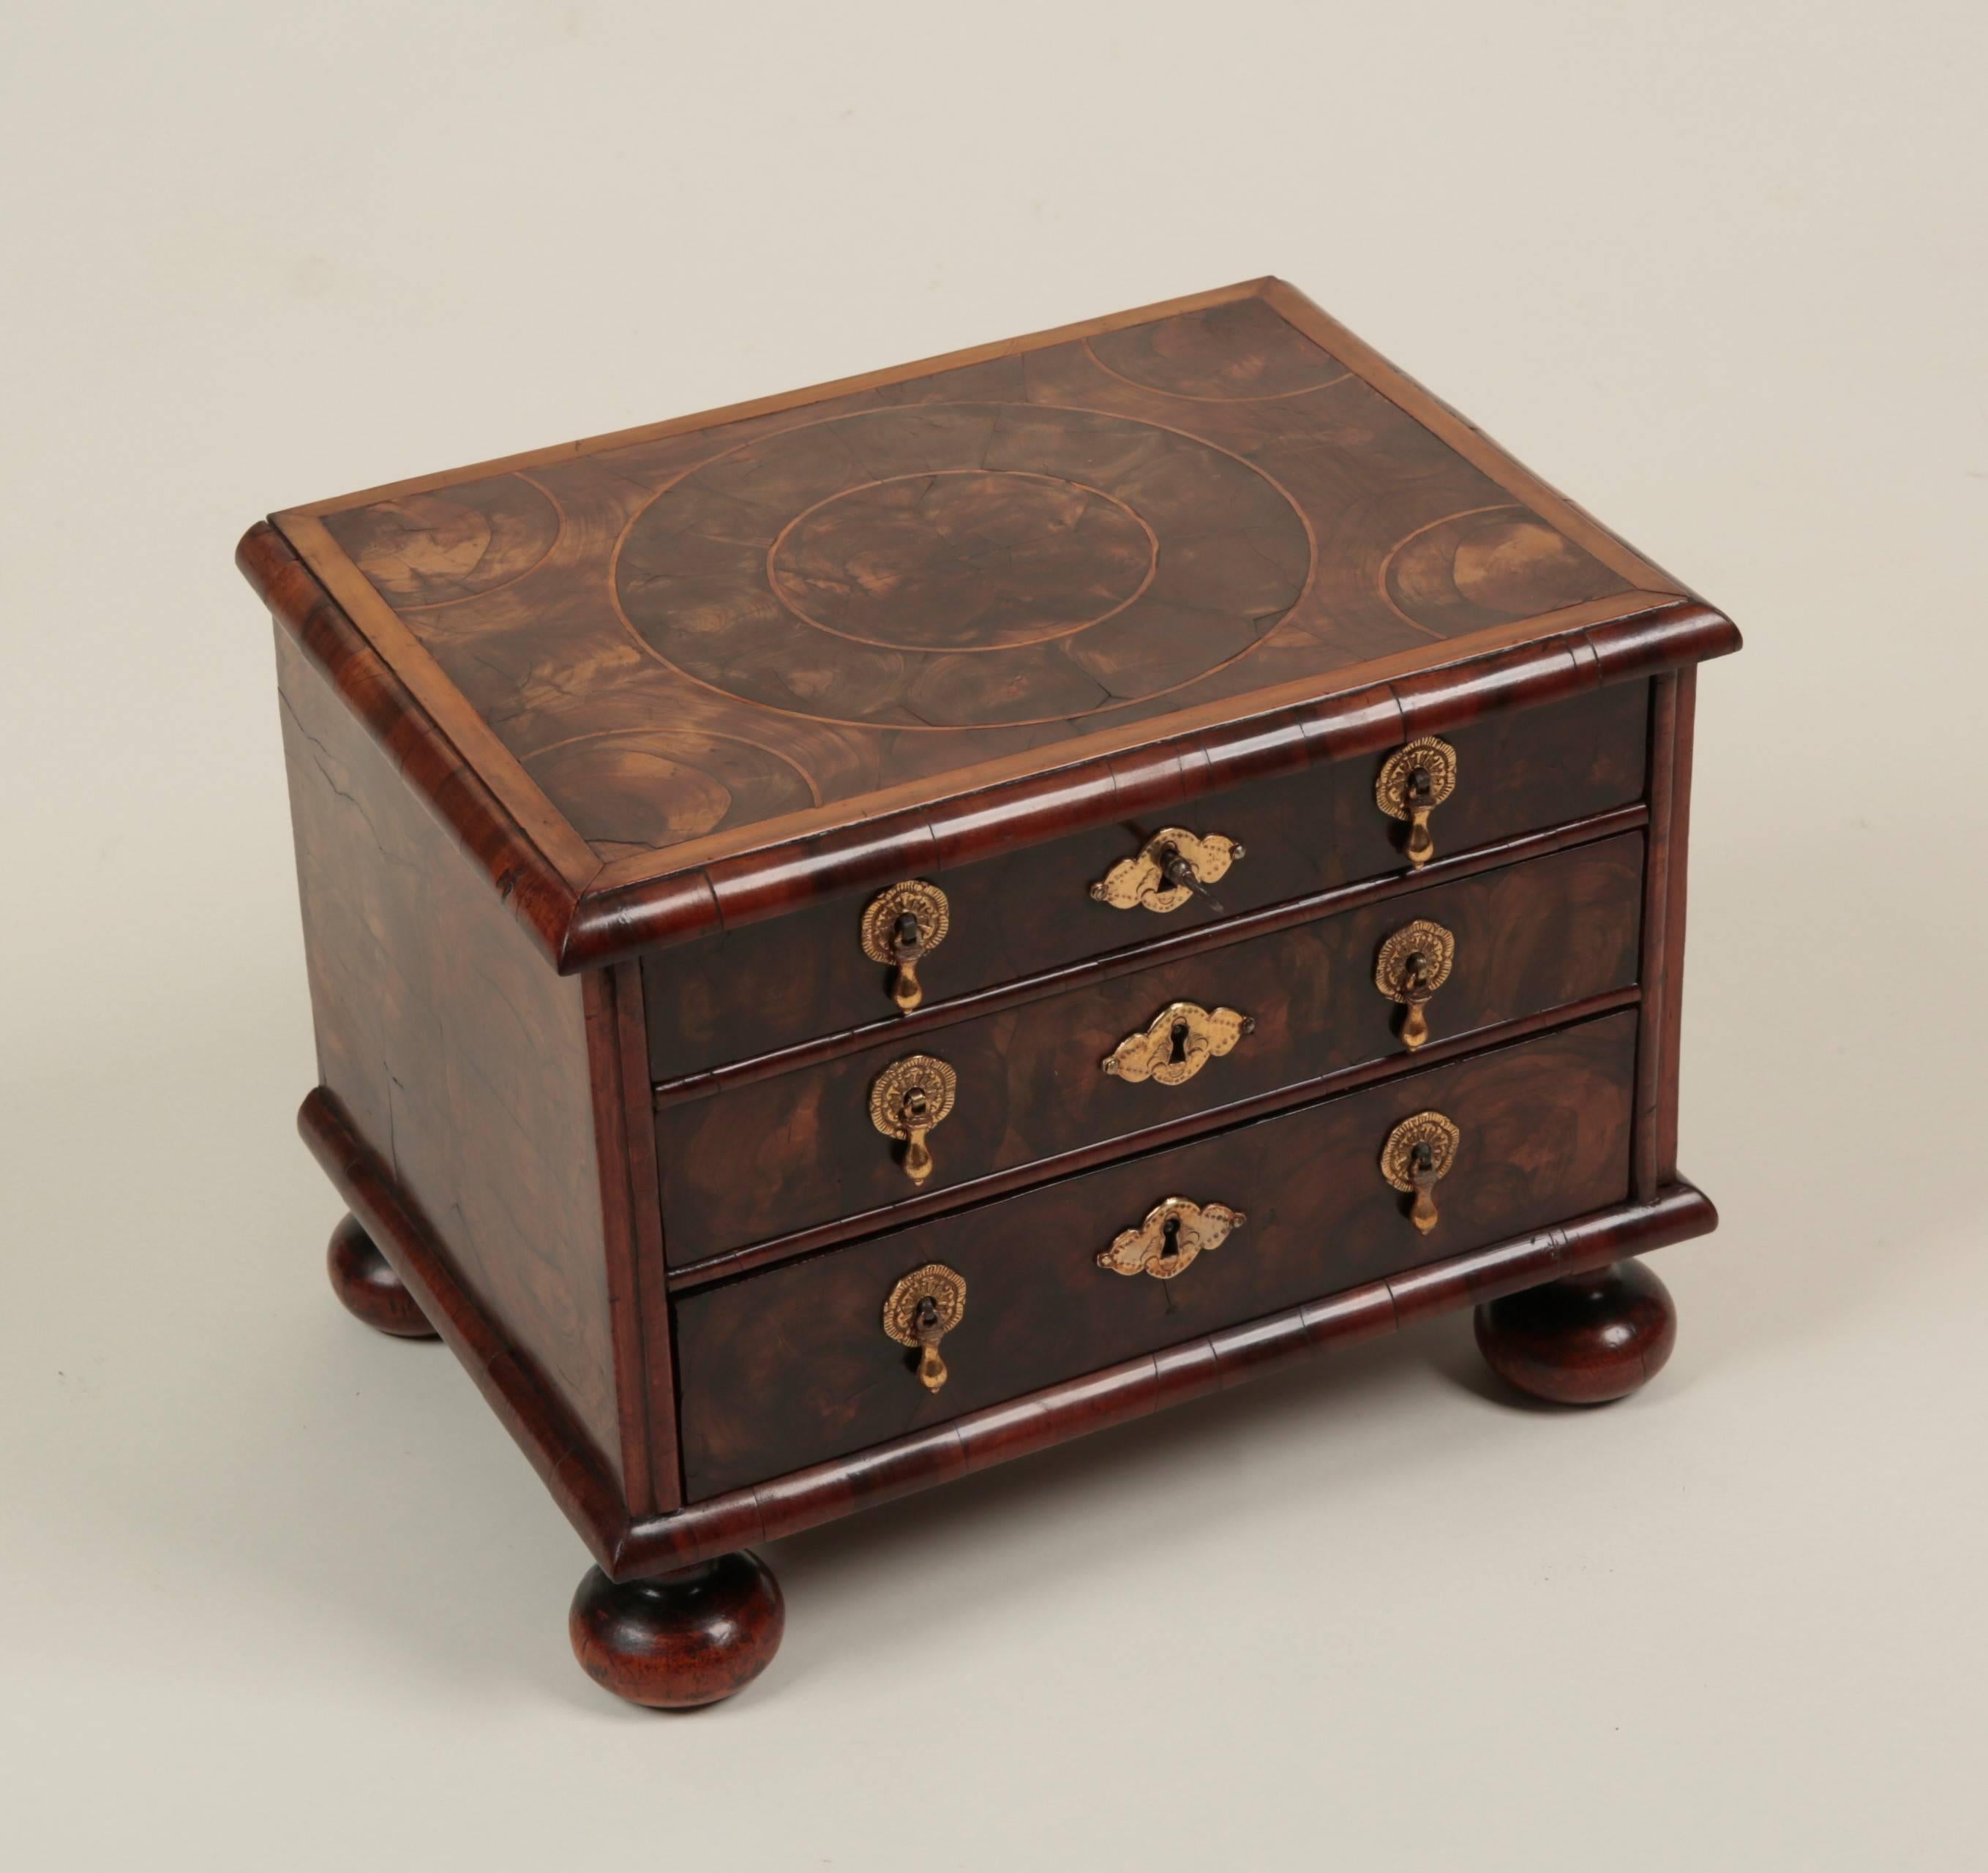 17th Century William & Mary Oyster Veneered Miniature Chest For Sale